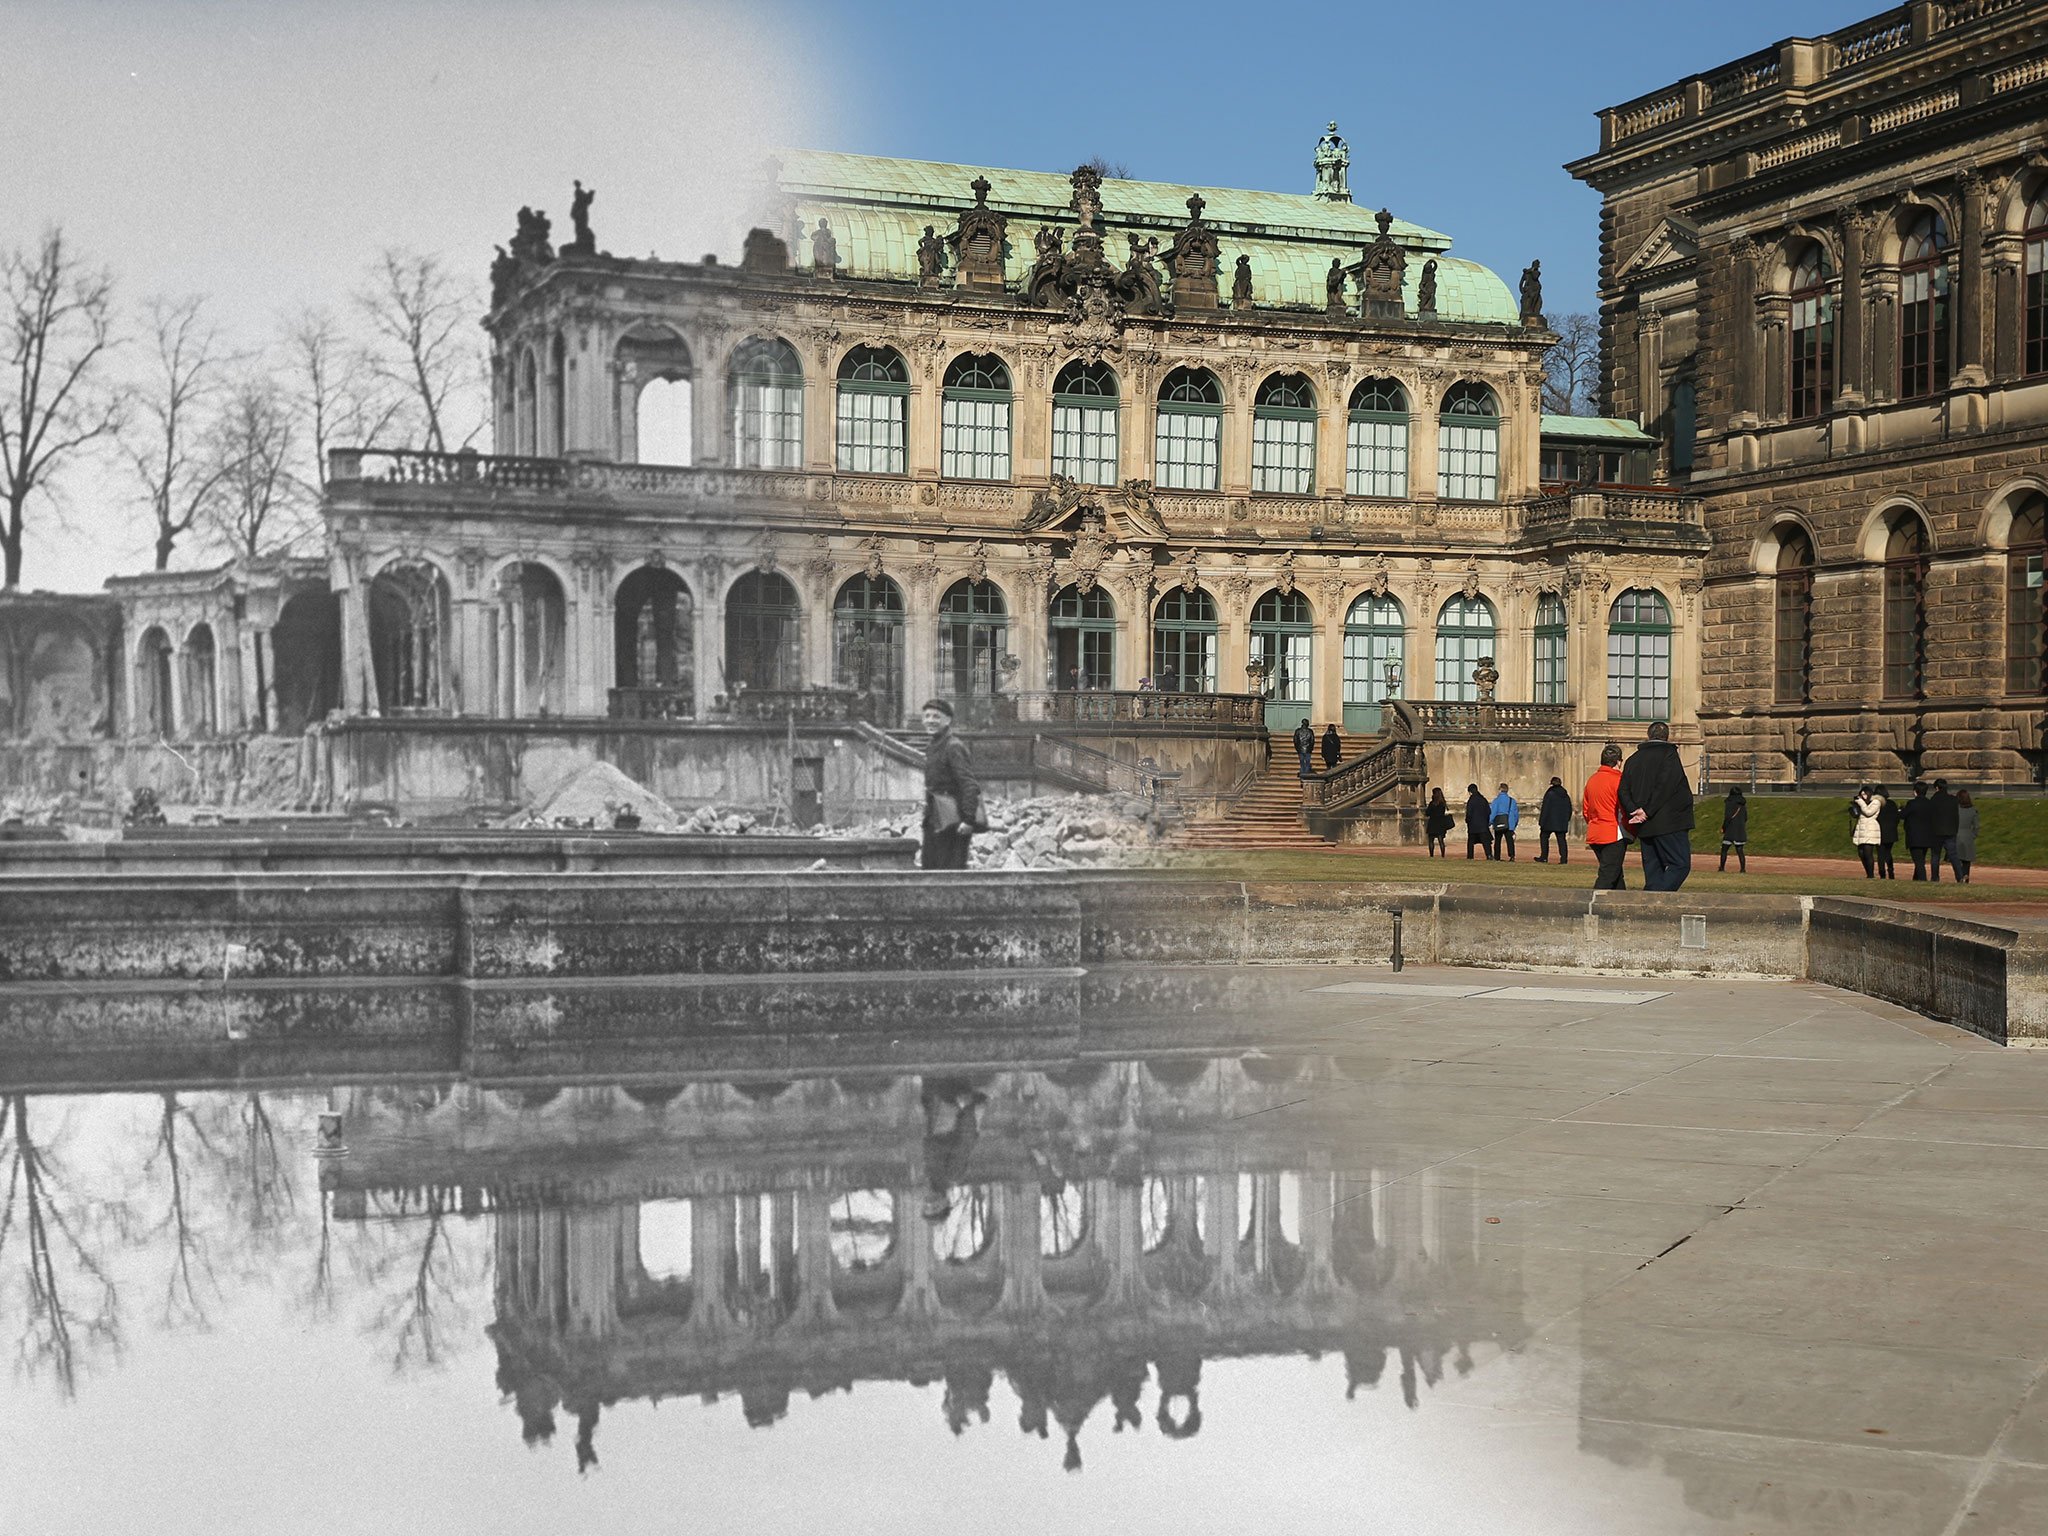 Dresden bombing: Composite images show the WWII ruin of German city ...